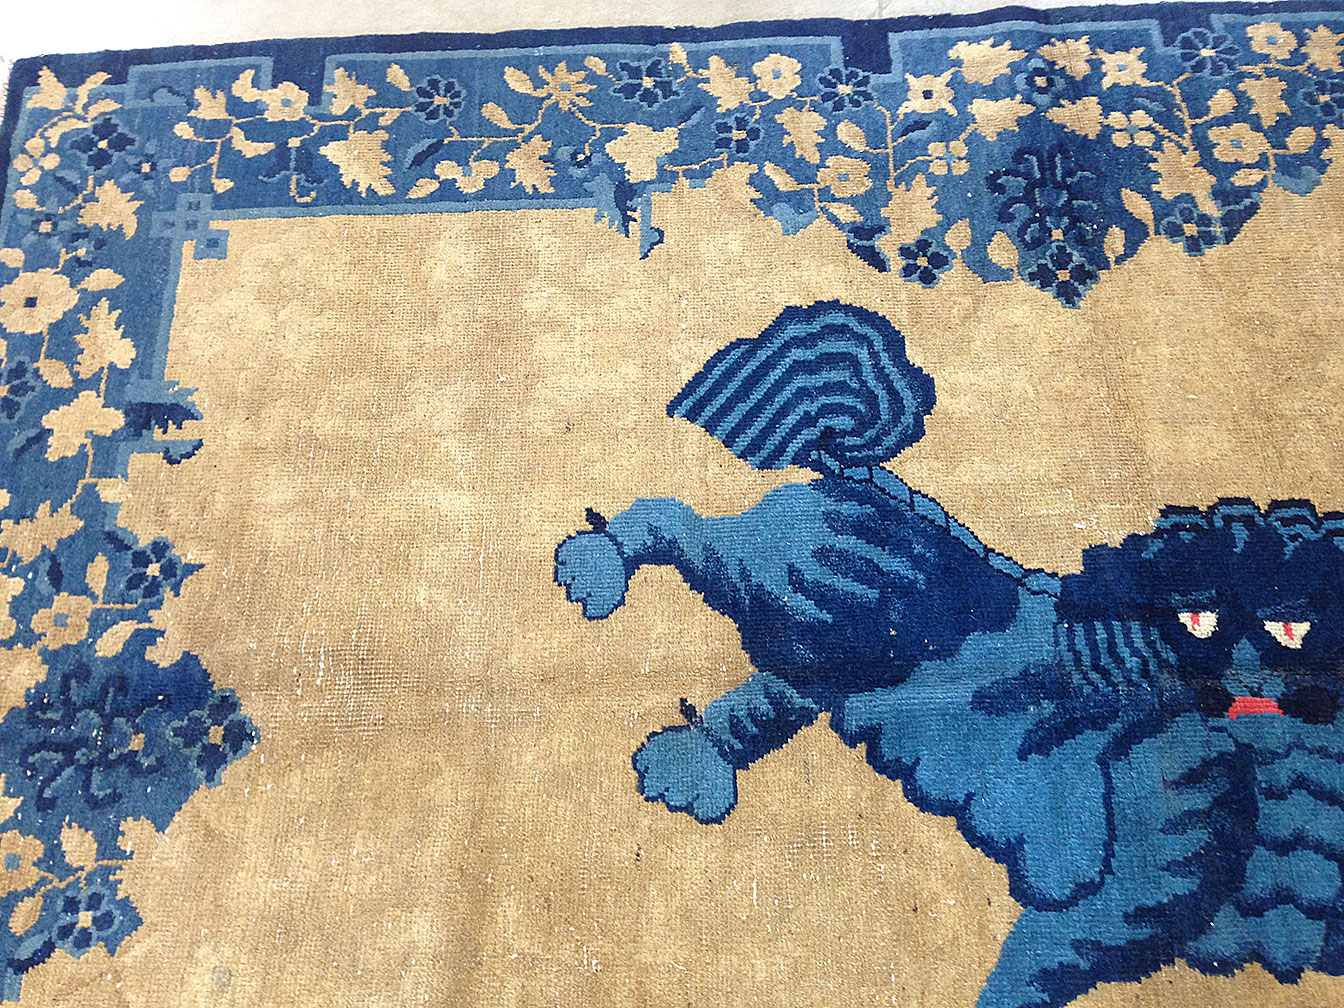 Antique chinese Rug - # 50416